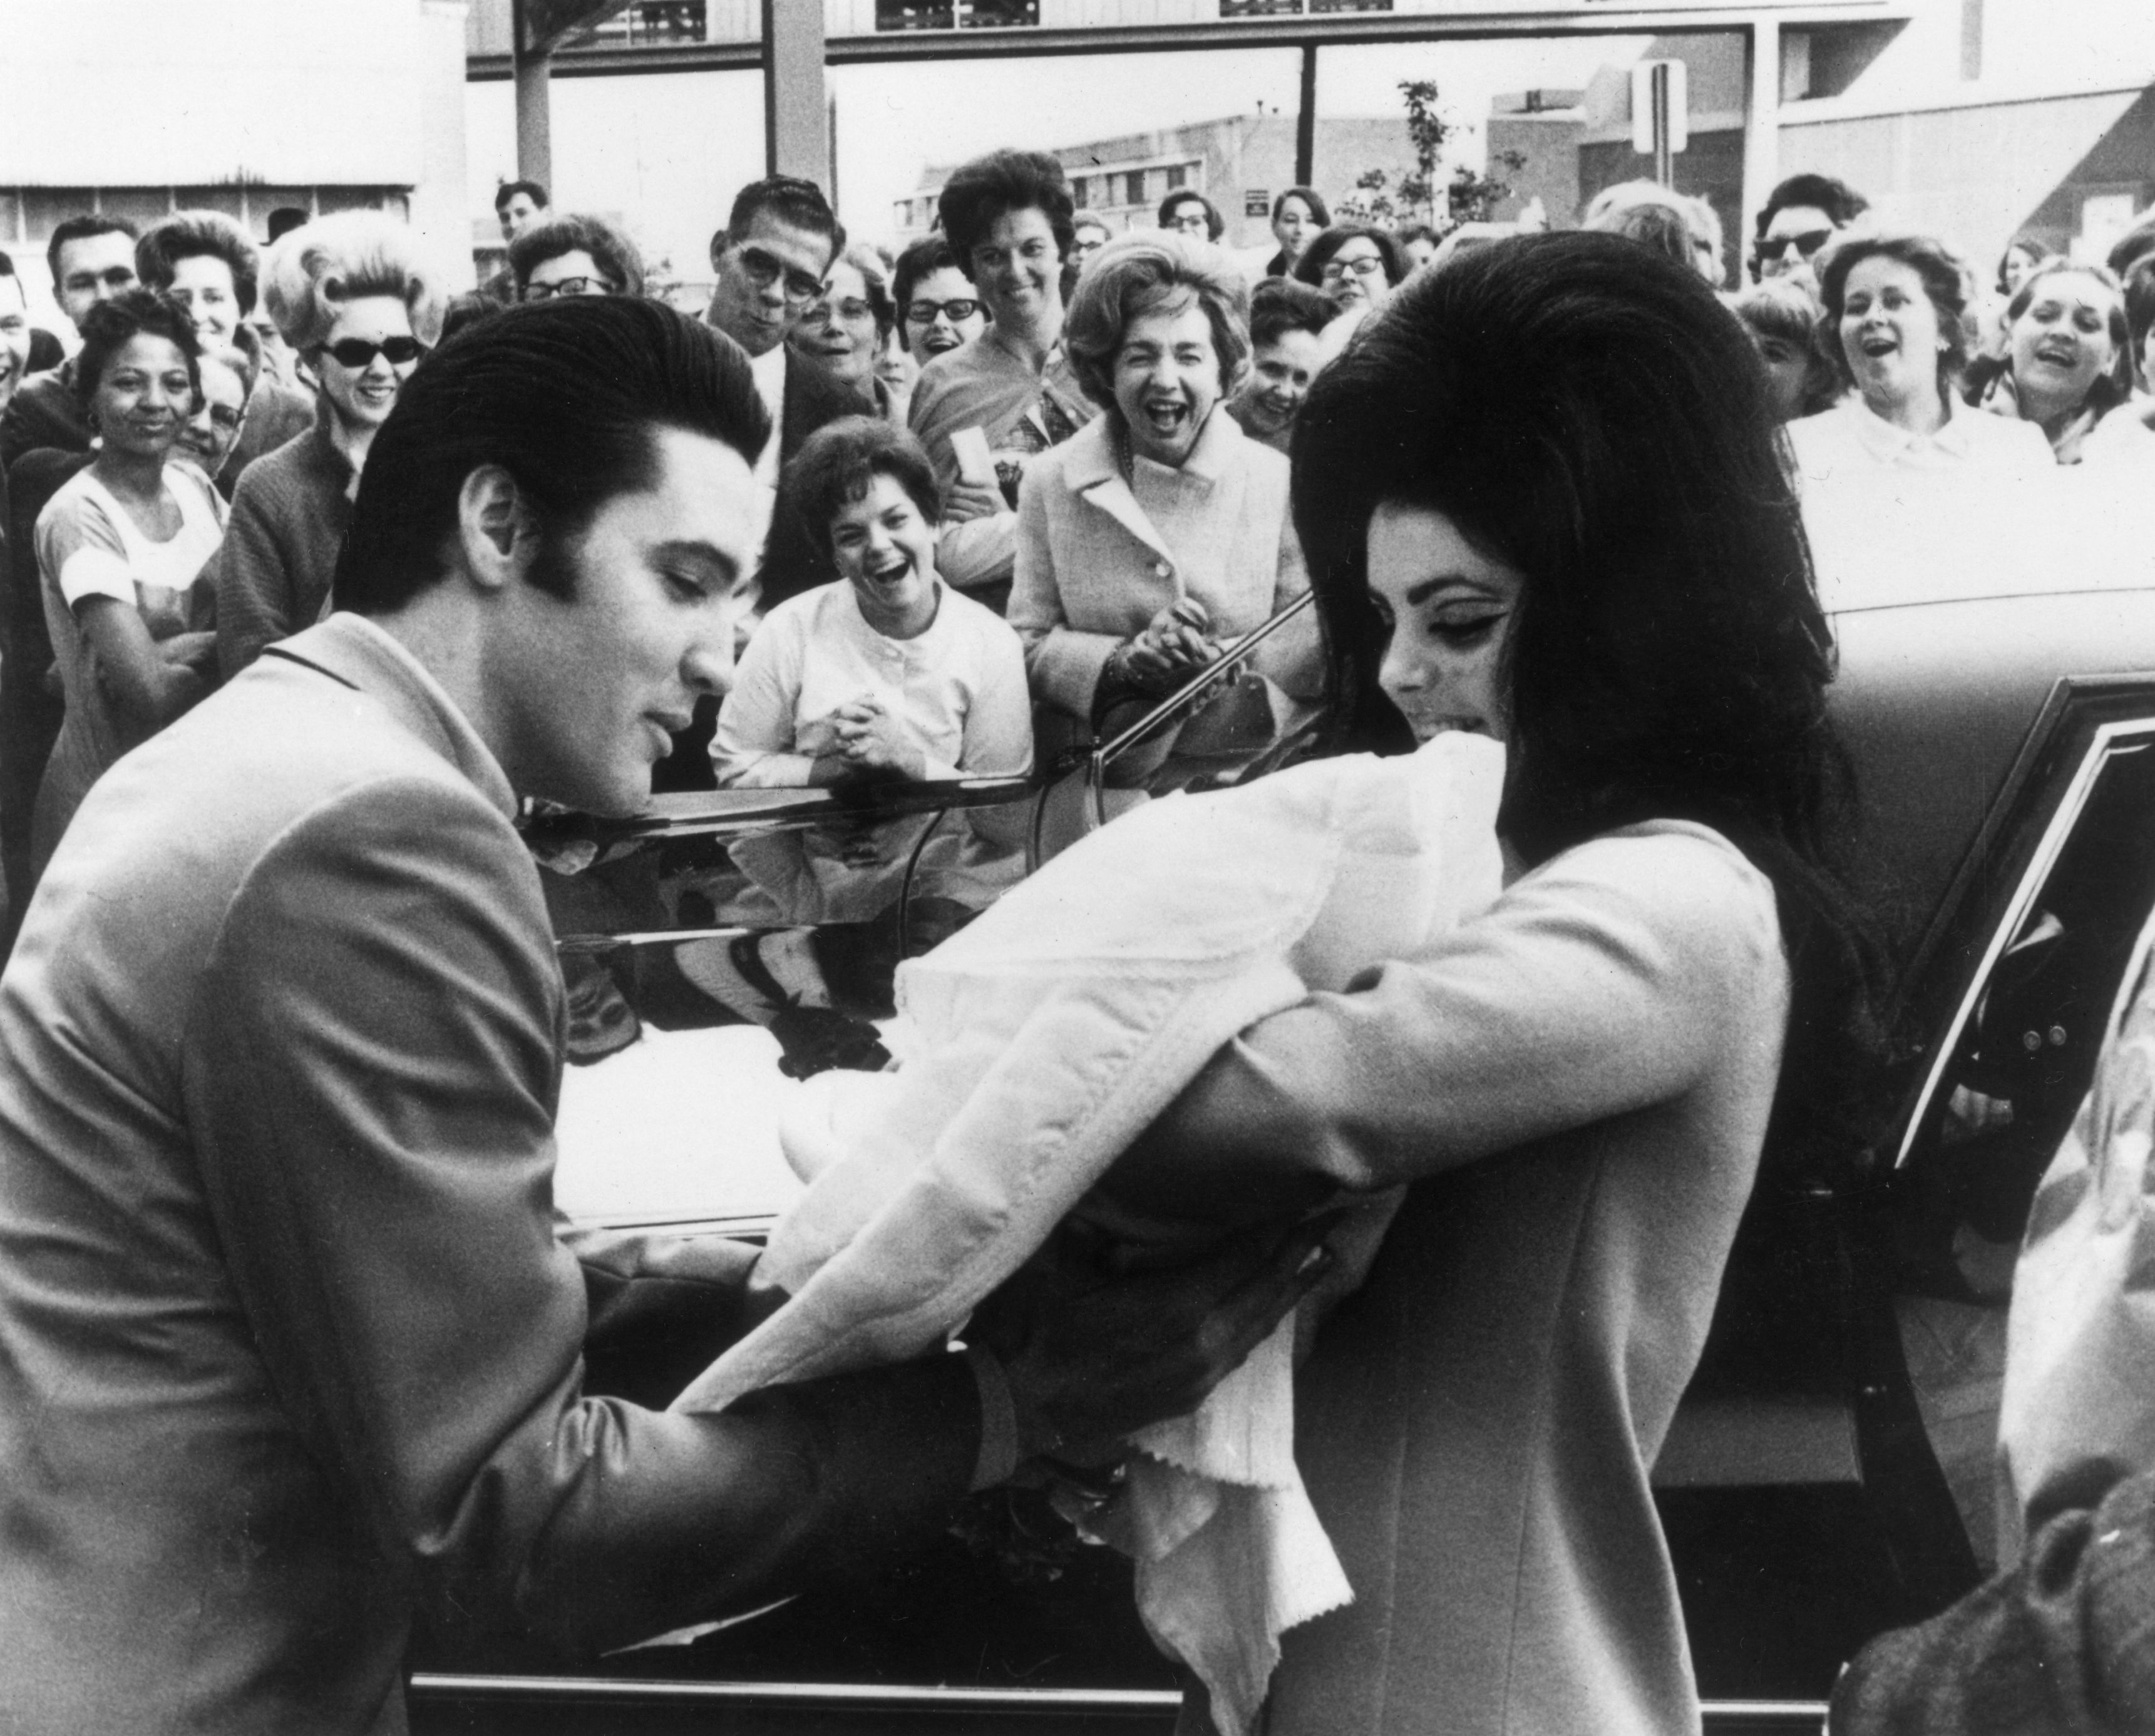 The real Elvis and Priscilla with baby Lisa Marie in front of a crowd of fans